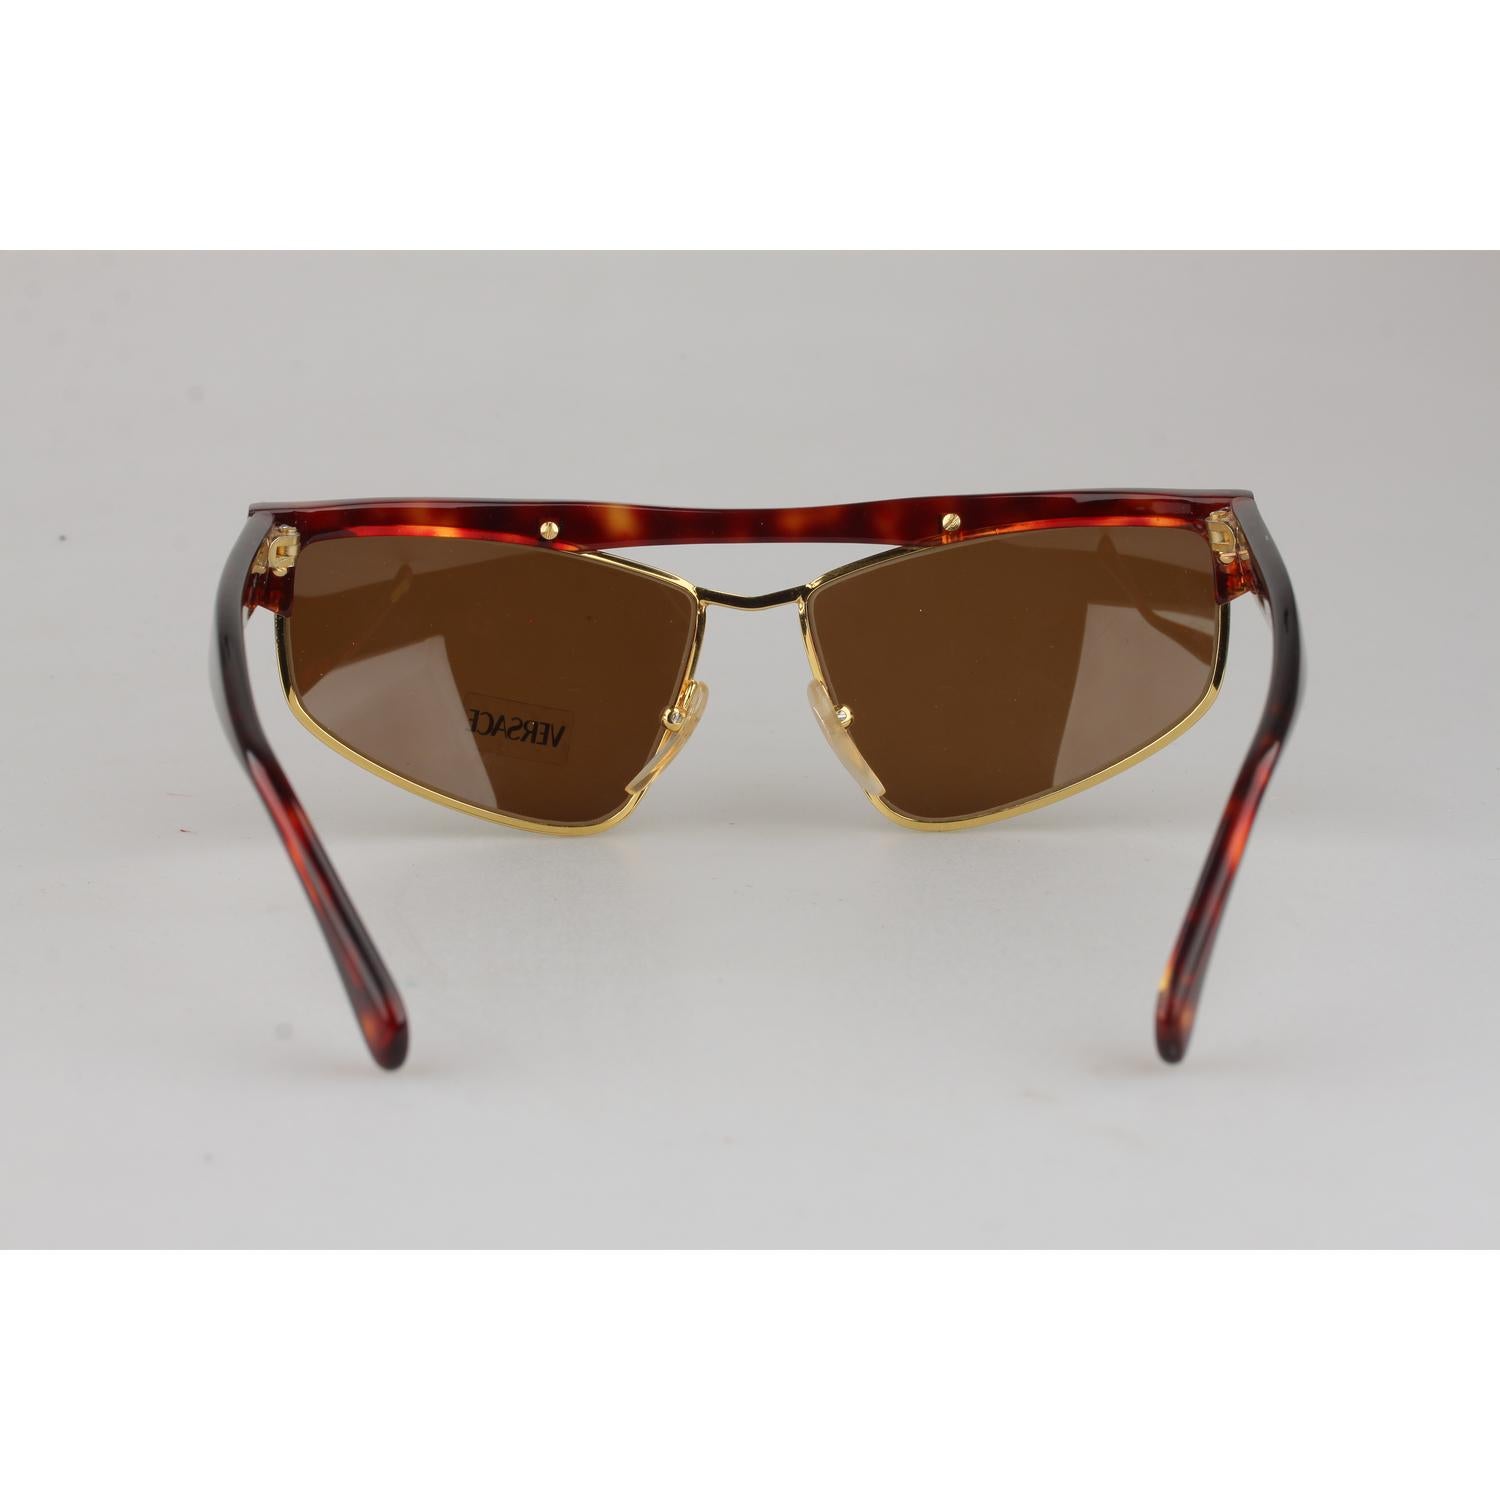 Women's or Men's Gianni Versace Vintage Brown Sunglasses Mod. S01 Col 740 New Old Stock 